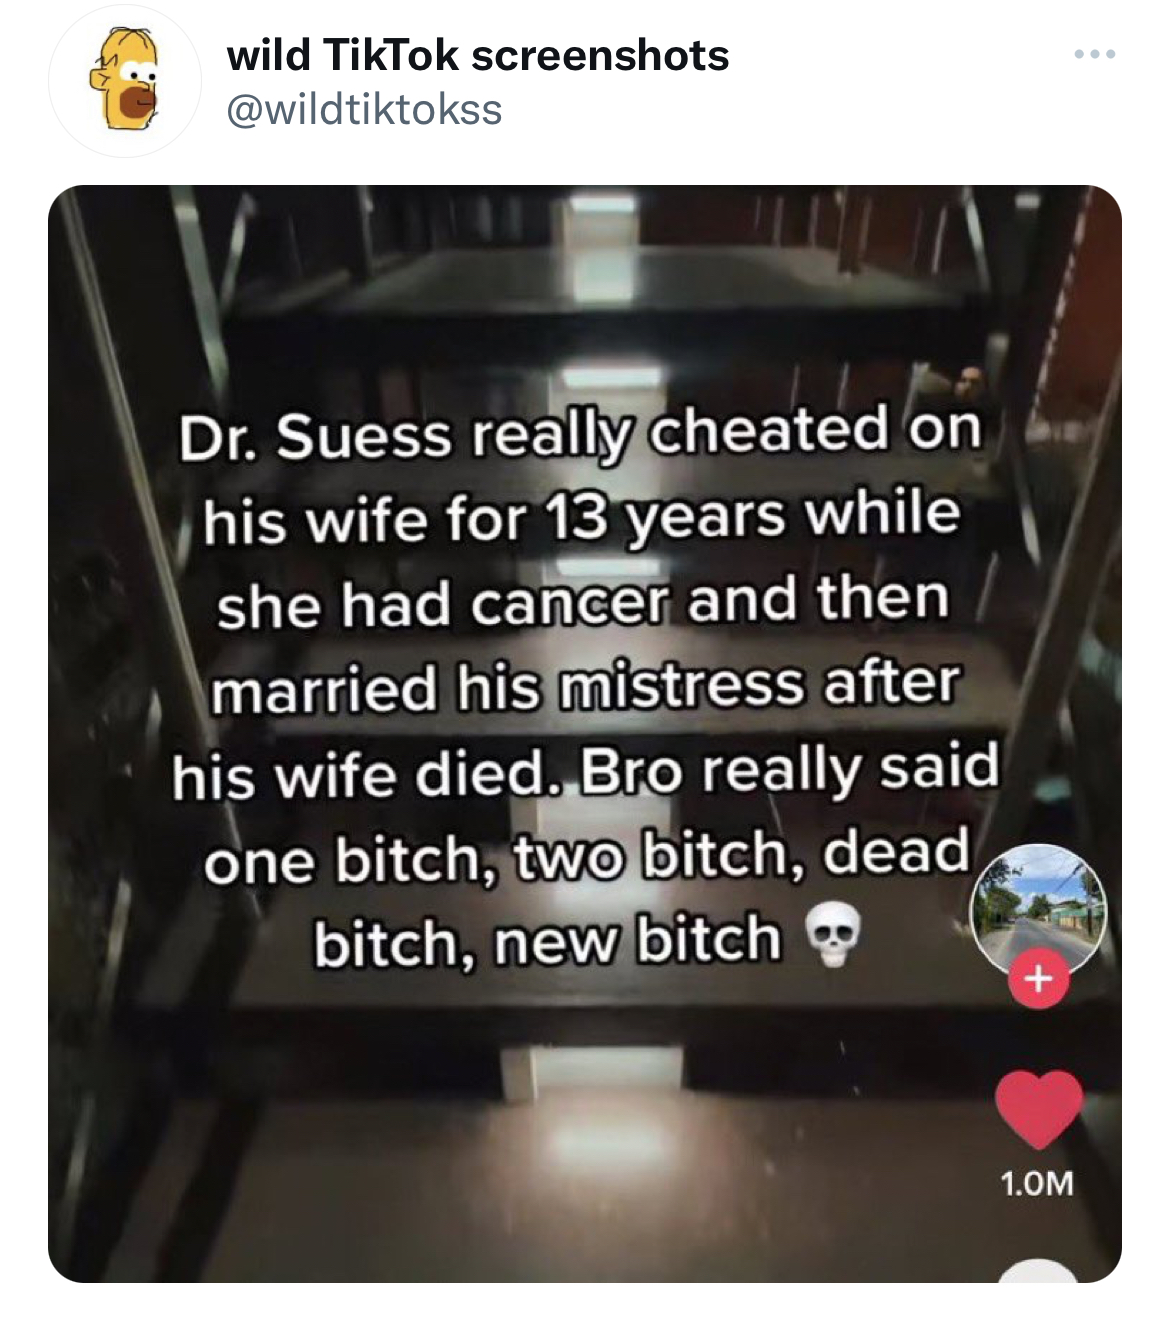 Tweets Roasting Celebs - dhl gogreen - wild TikTok screenshots Dr. Suess really cheated on his wife for 13 years while she had cancer and then married his mistress after his wife died. Bro really said one bitch, two bitch, dead bitch, new bitch www 1.0M